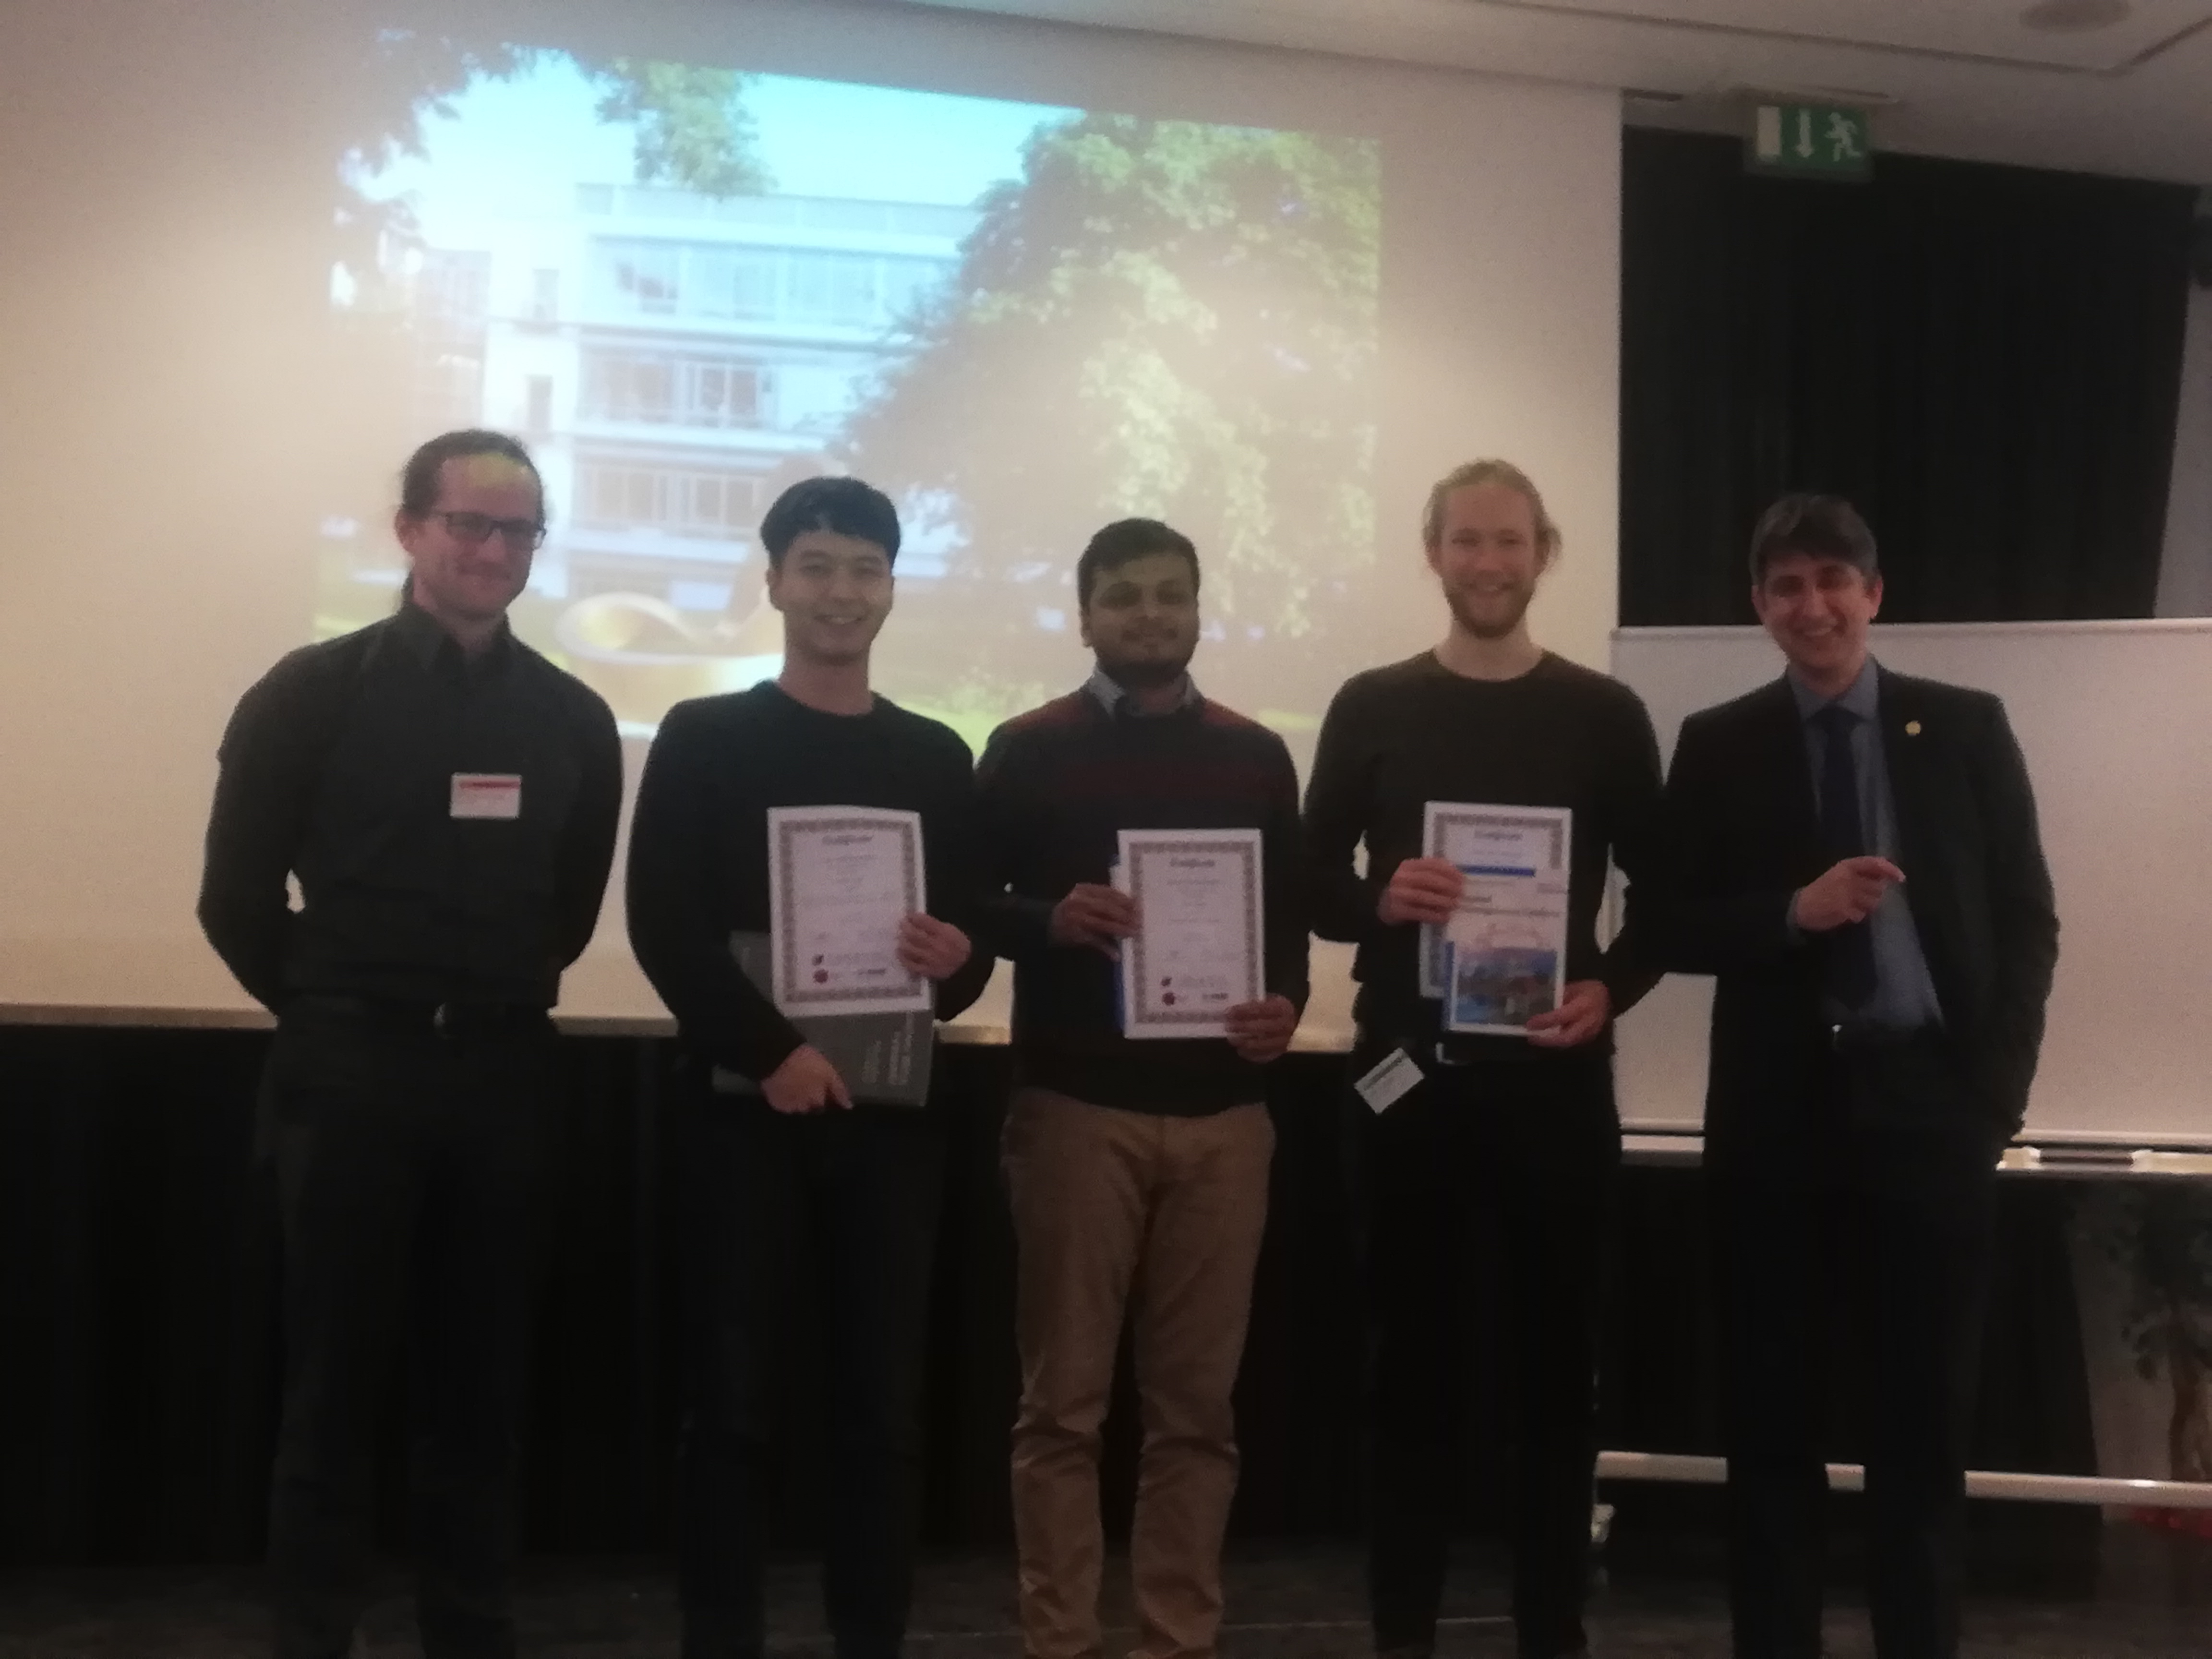 Yoonsu received 'First Poster Award'  at the CaRLa Winter school, heidelberg, Germany 사진